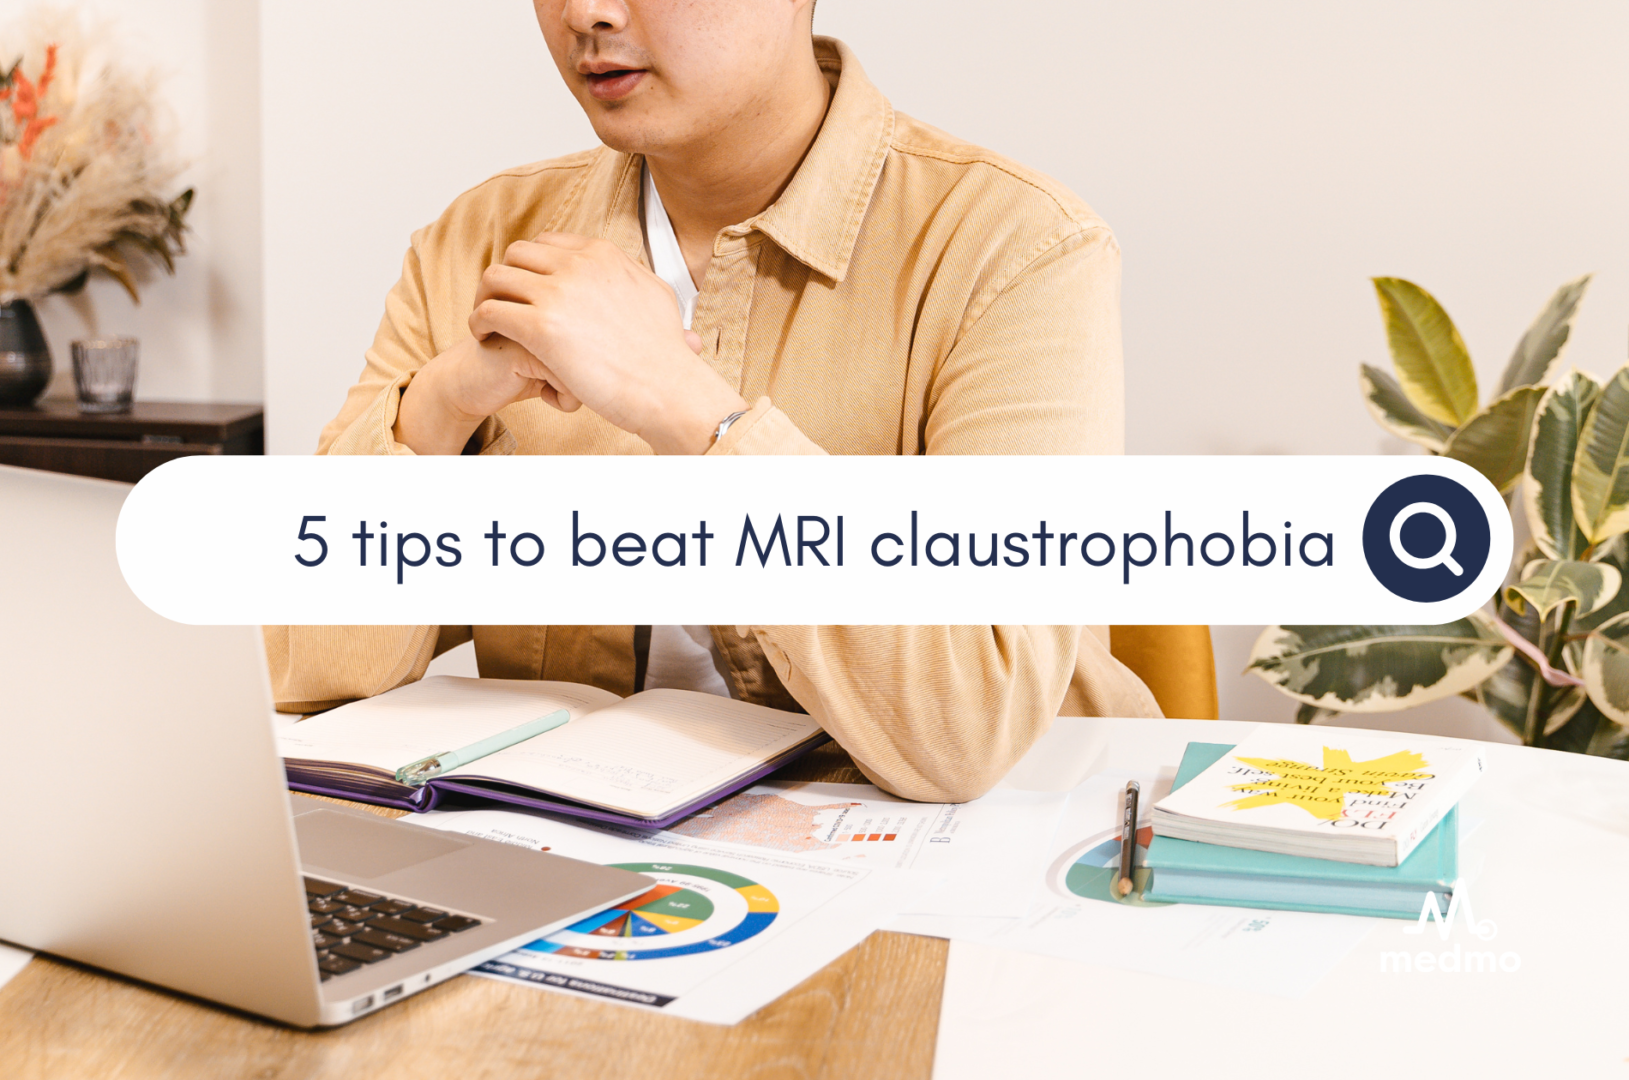 5 tips to beat MRI claustrophobia